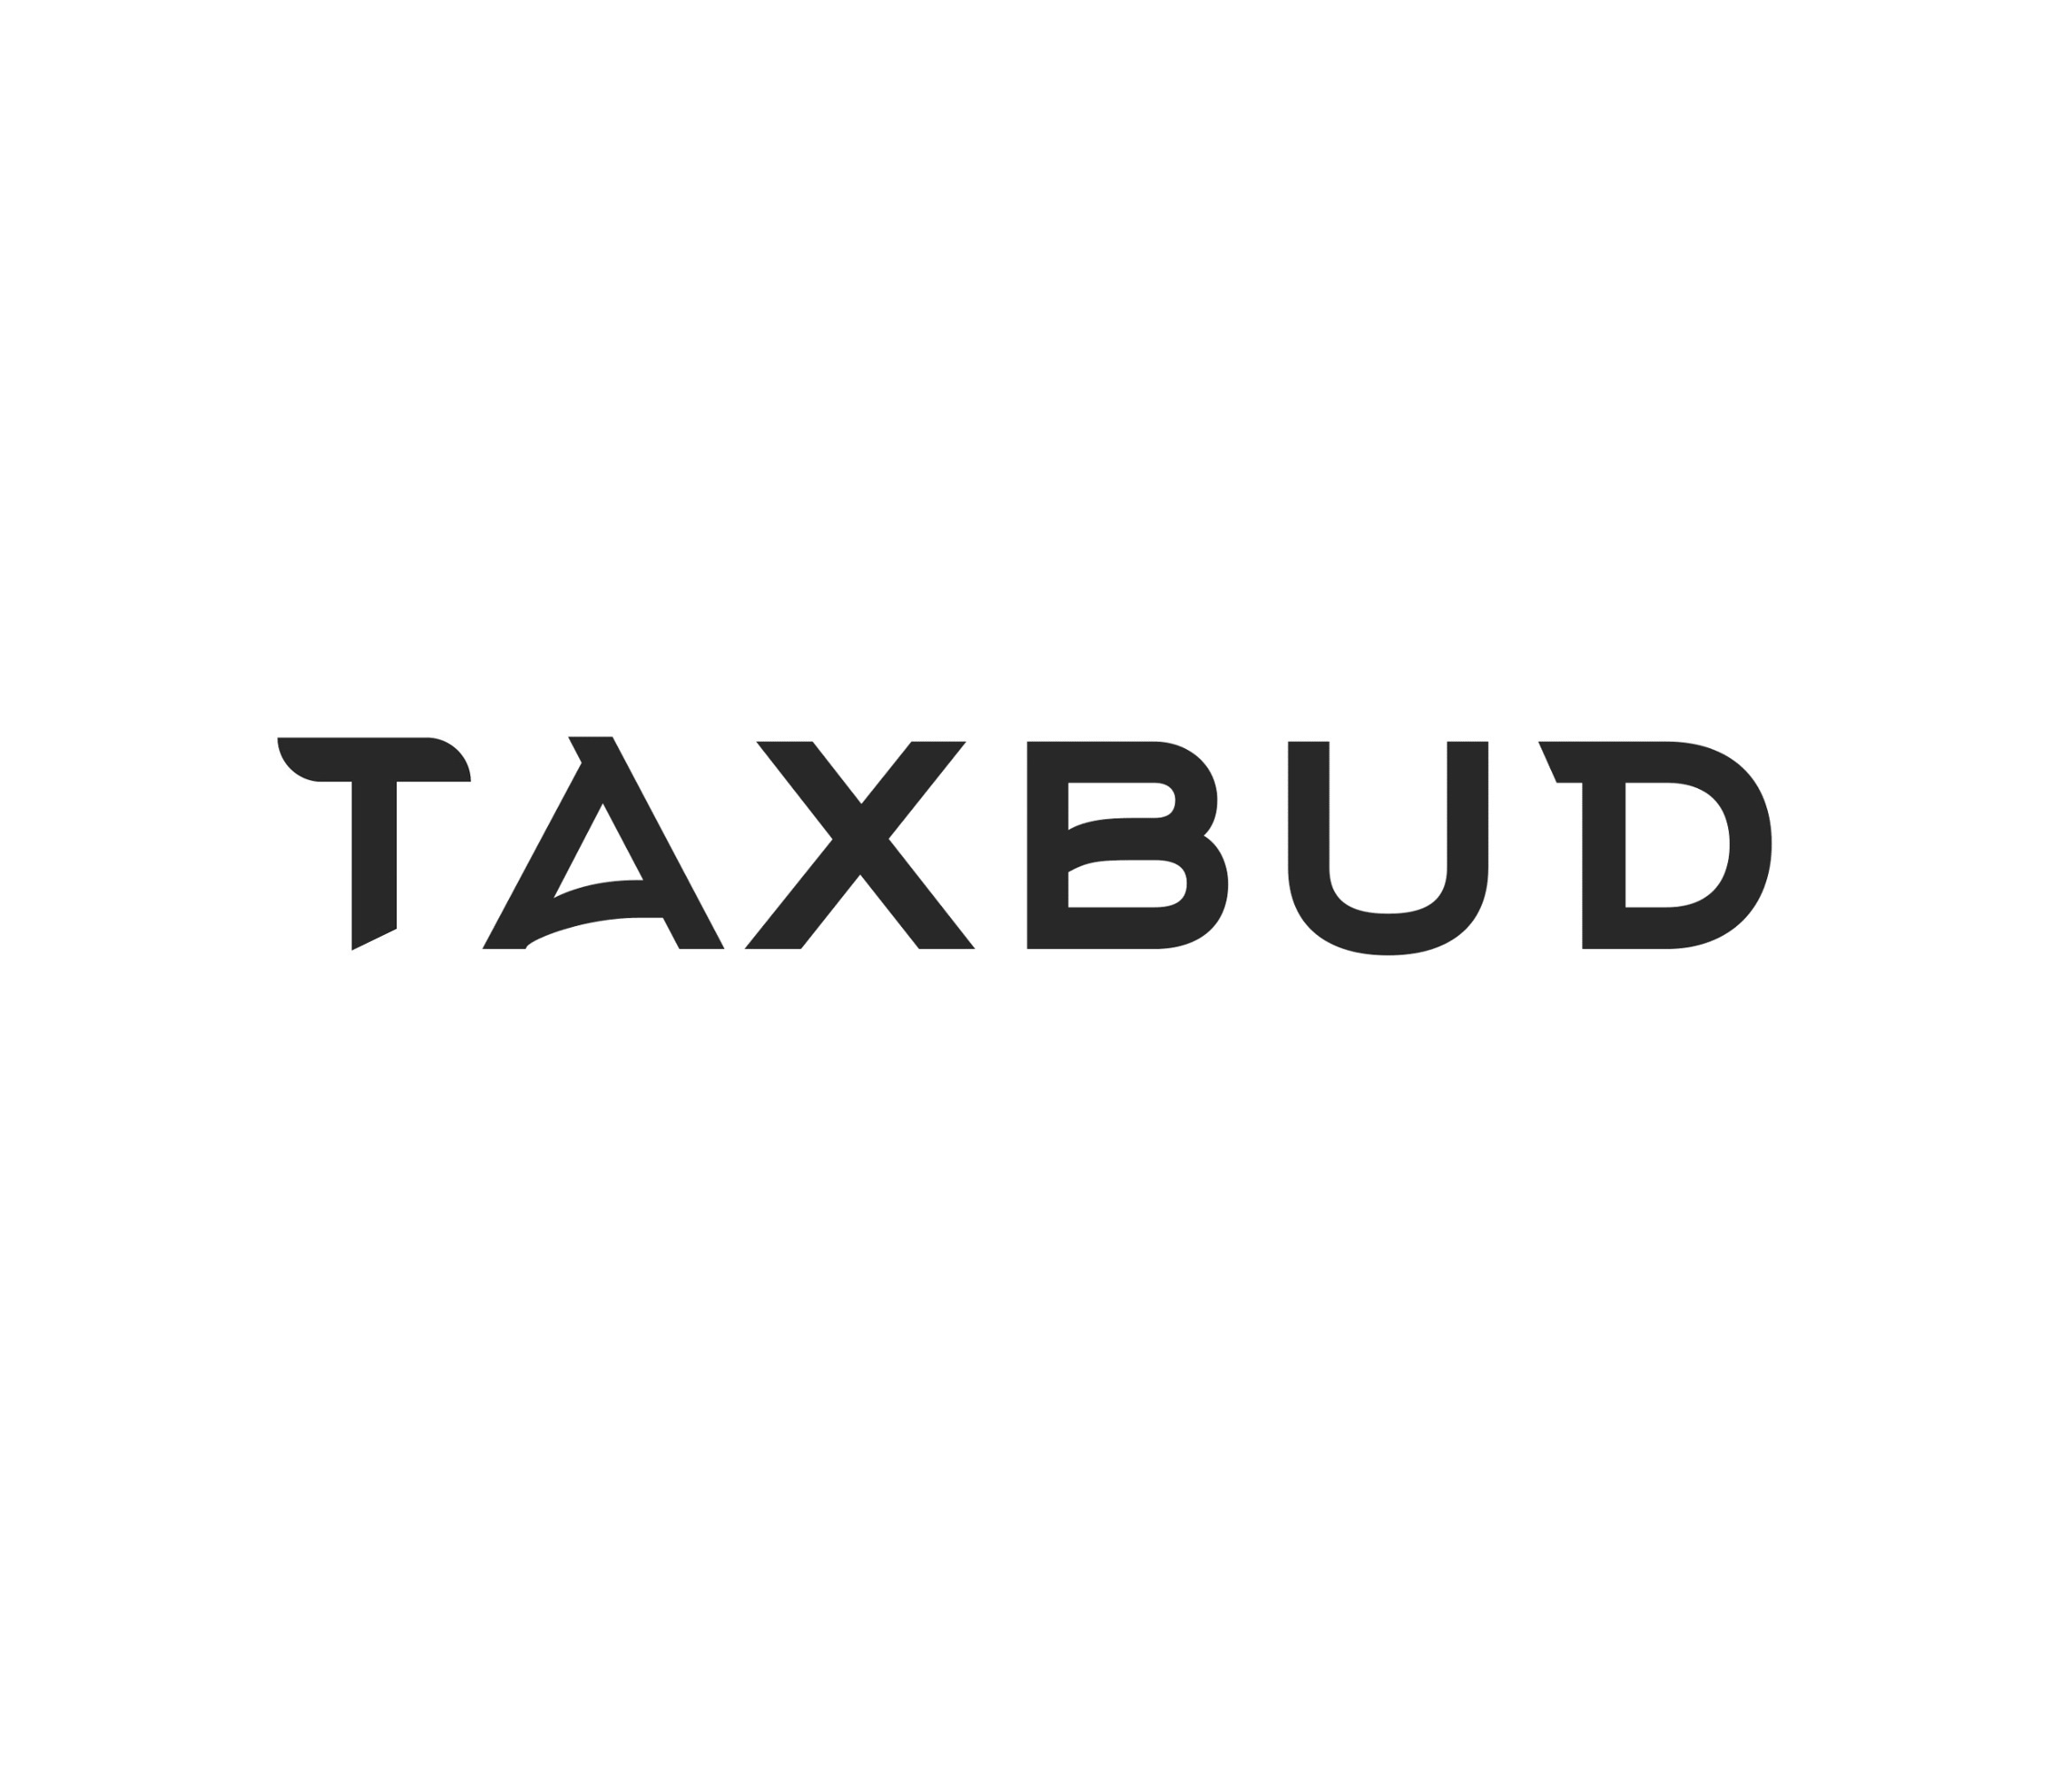 TaxBud: The Go-To Platform for Tax Services On Demand – Making it efficient and cost-effective to find, connect, and work with accountants that meet your needs